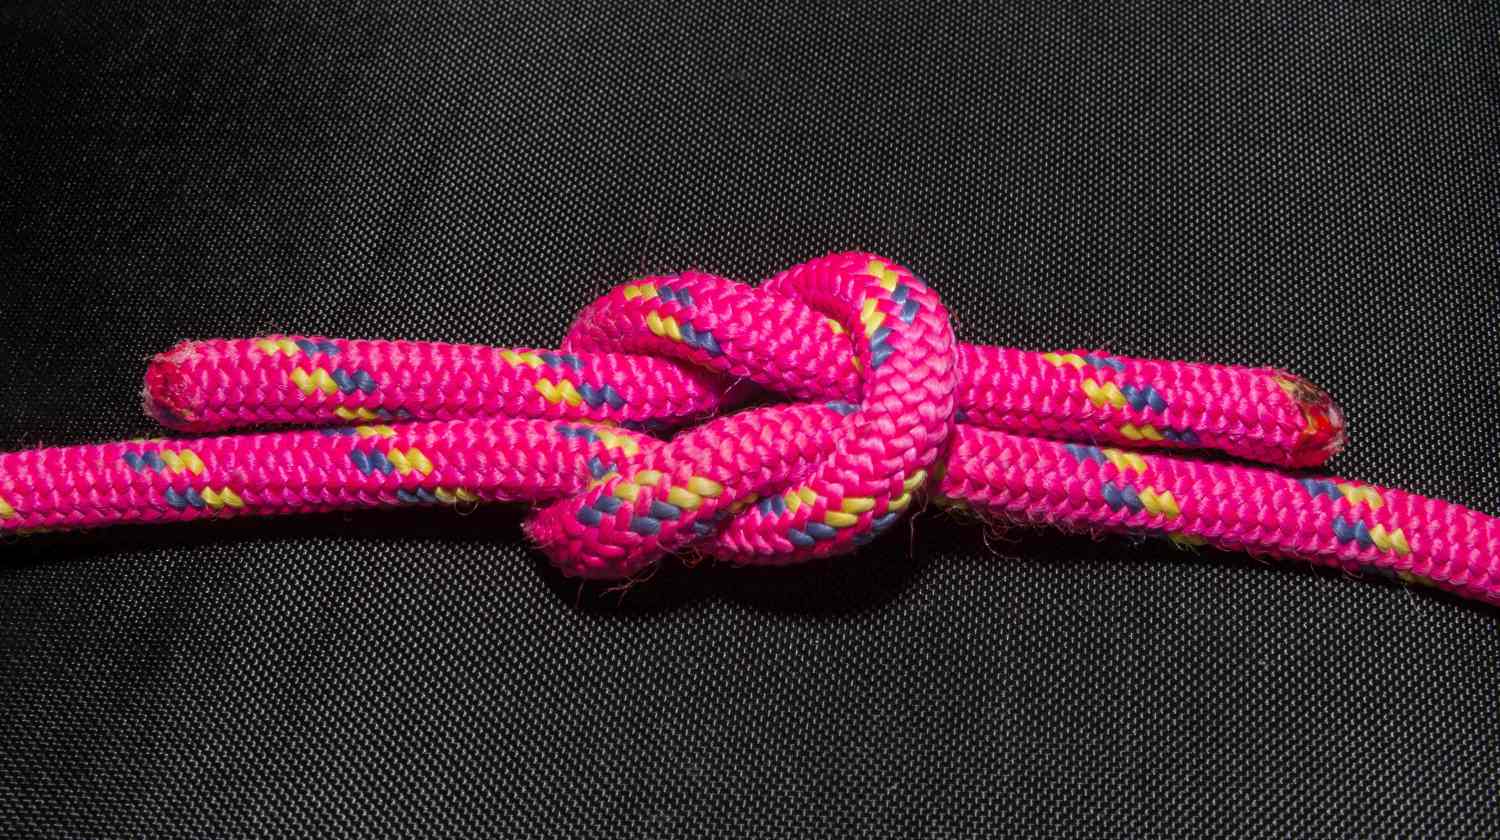 square knot accessory on table | How To Tie A Square Knot | Step-By-Step Instructions | square knot | basic knots | Featured